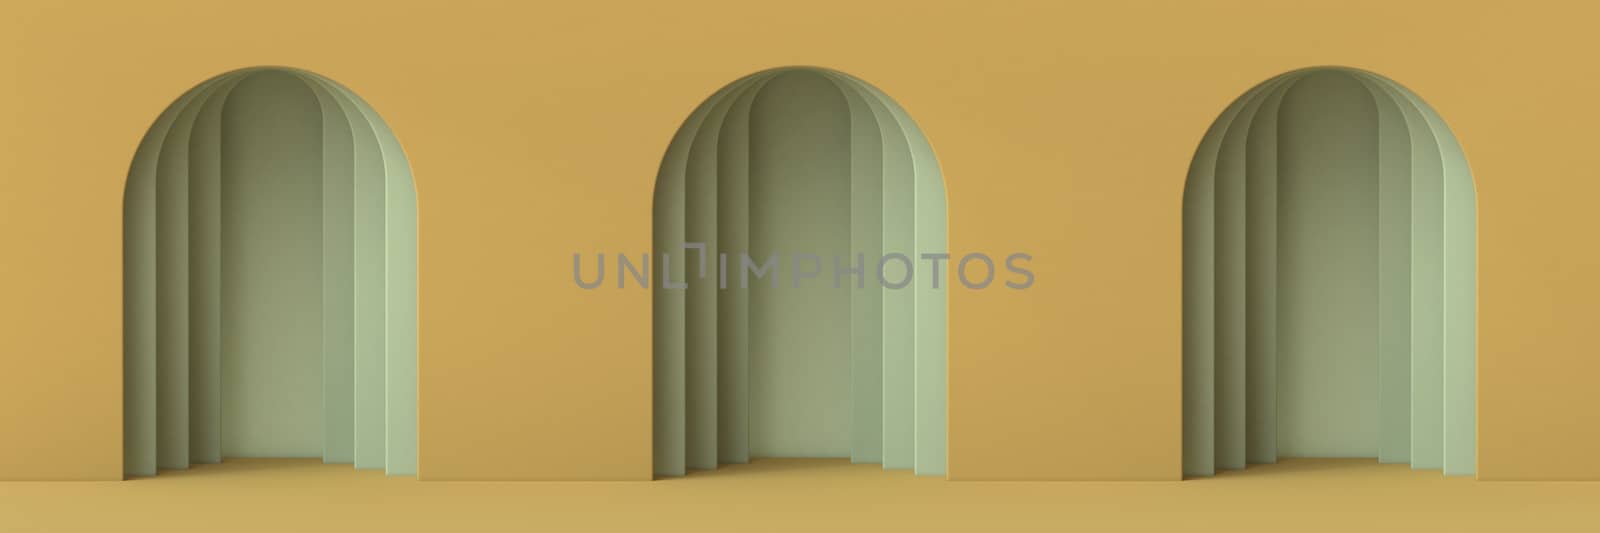 Abstract mock up three doors 3D render illustration on brown background